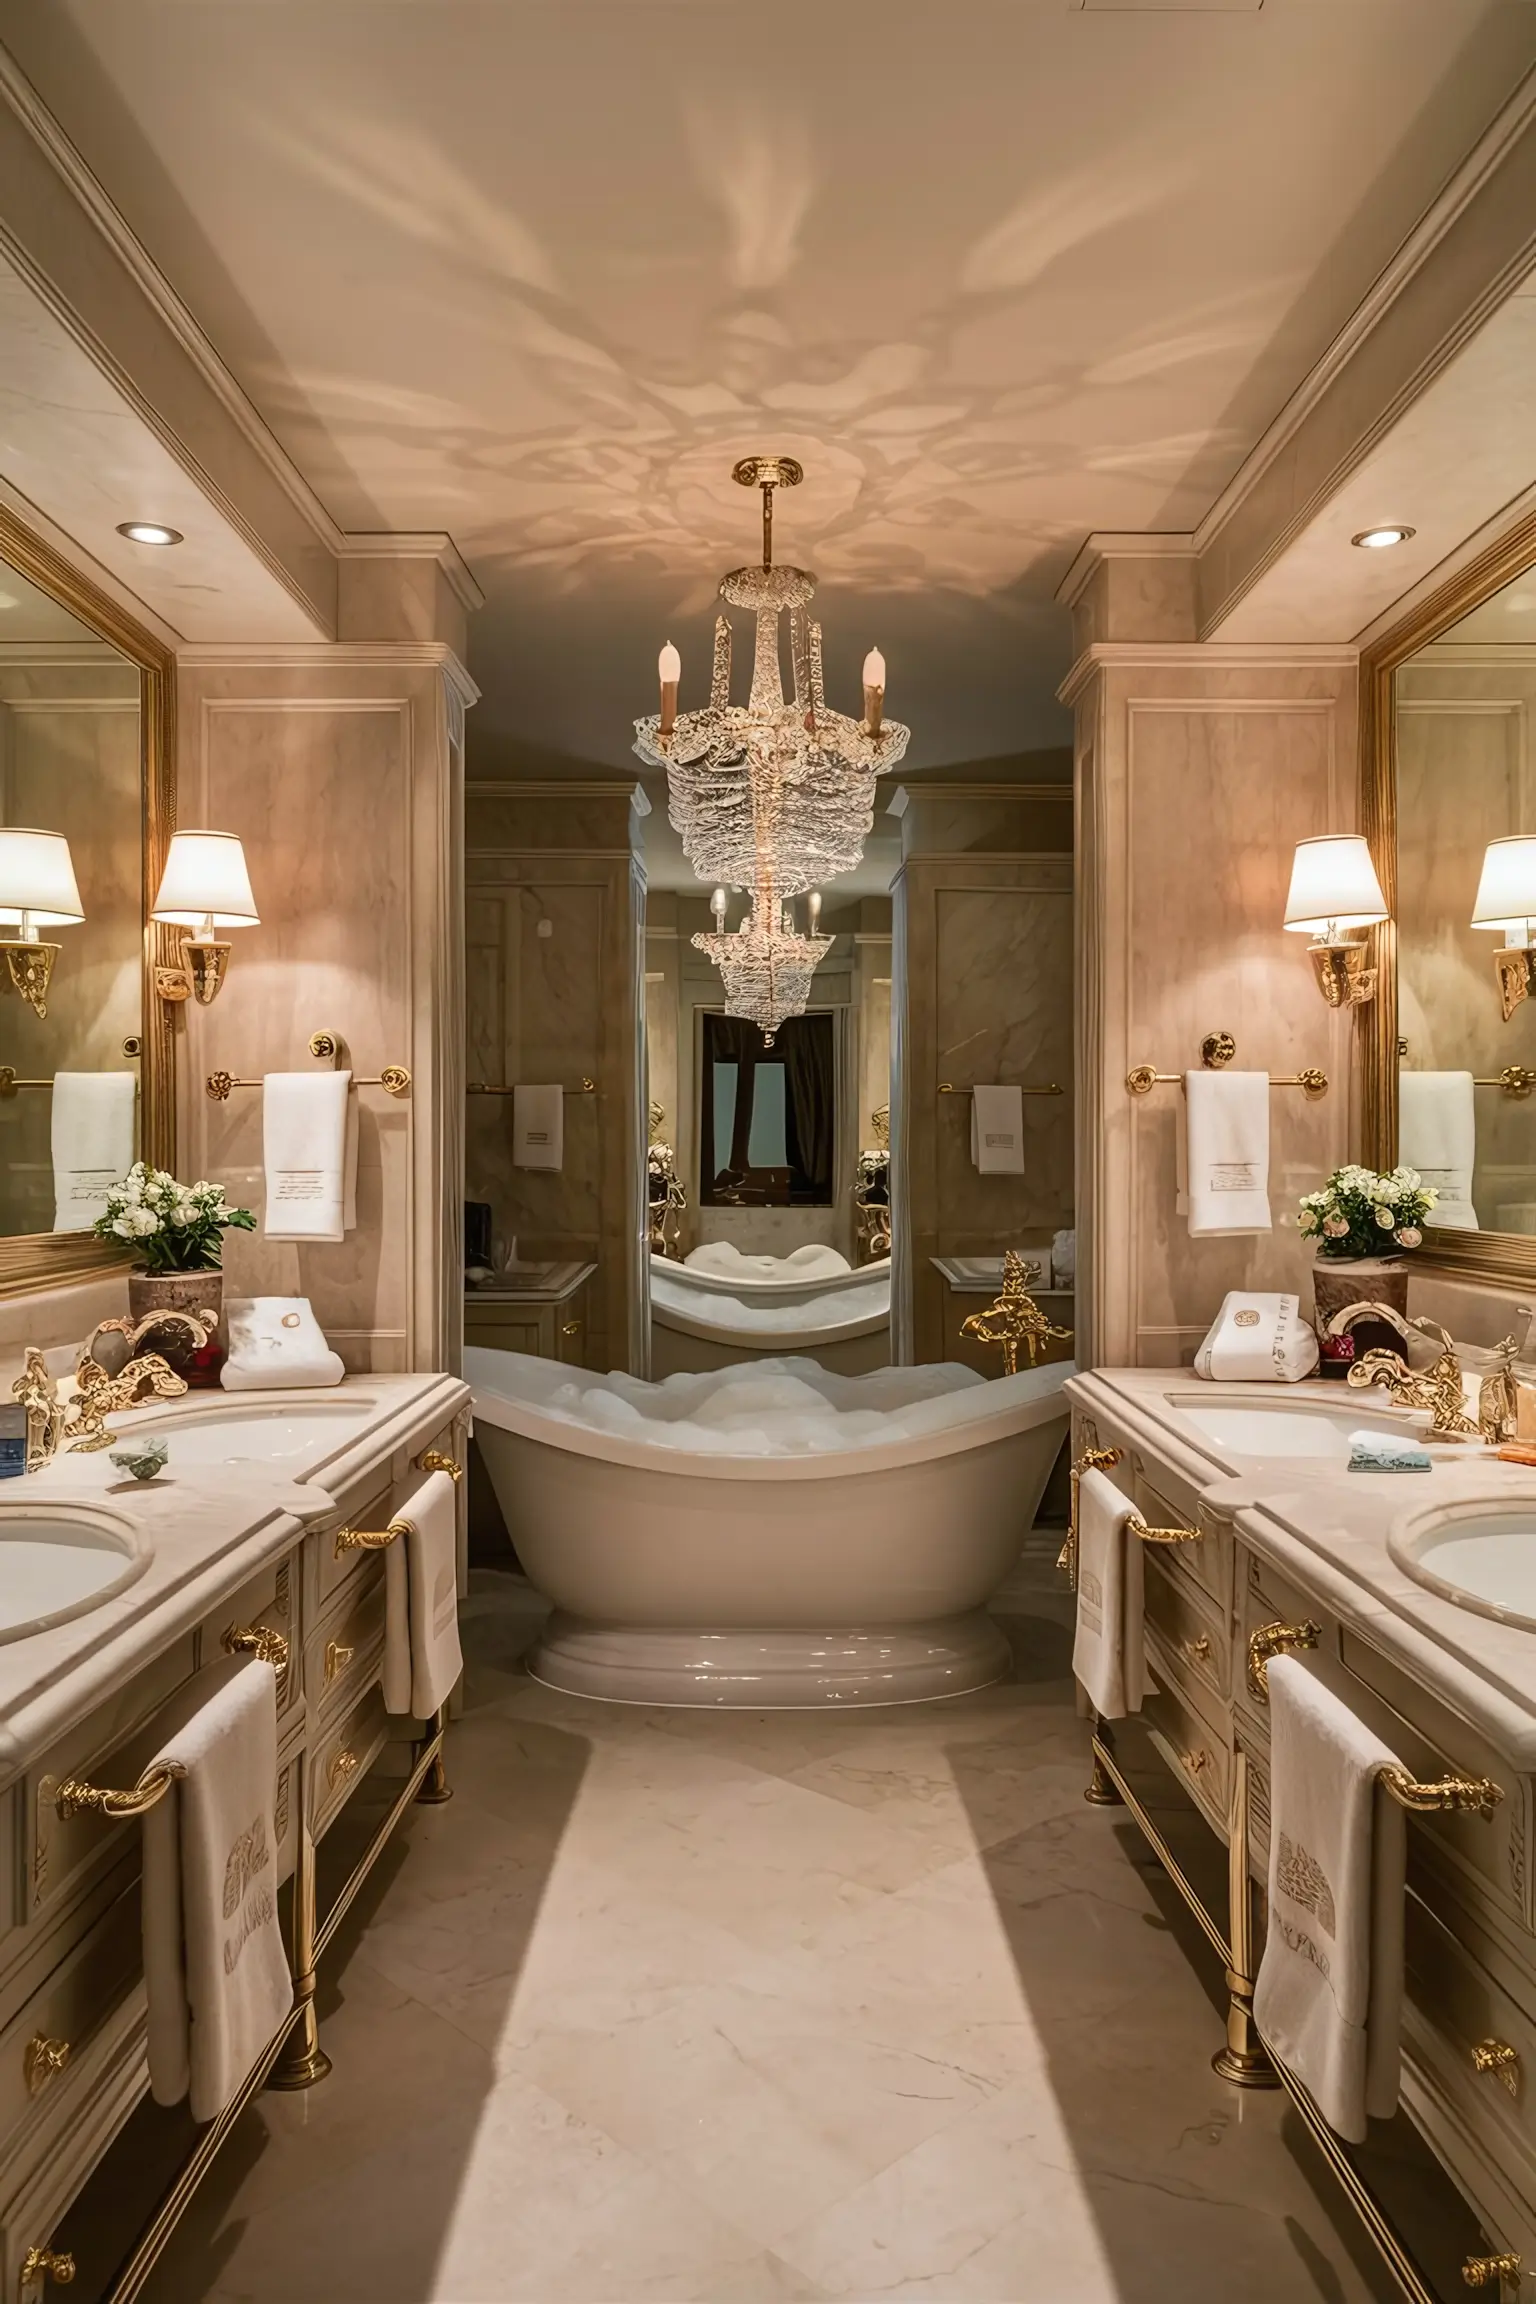 Luxury bathroom with marble countertops and gold fixtures.